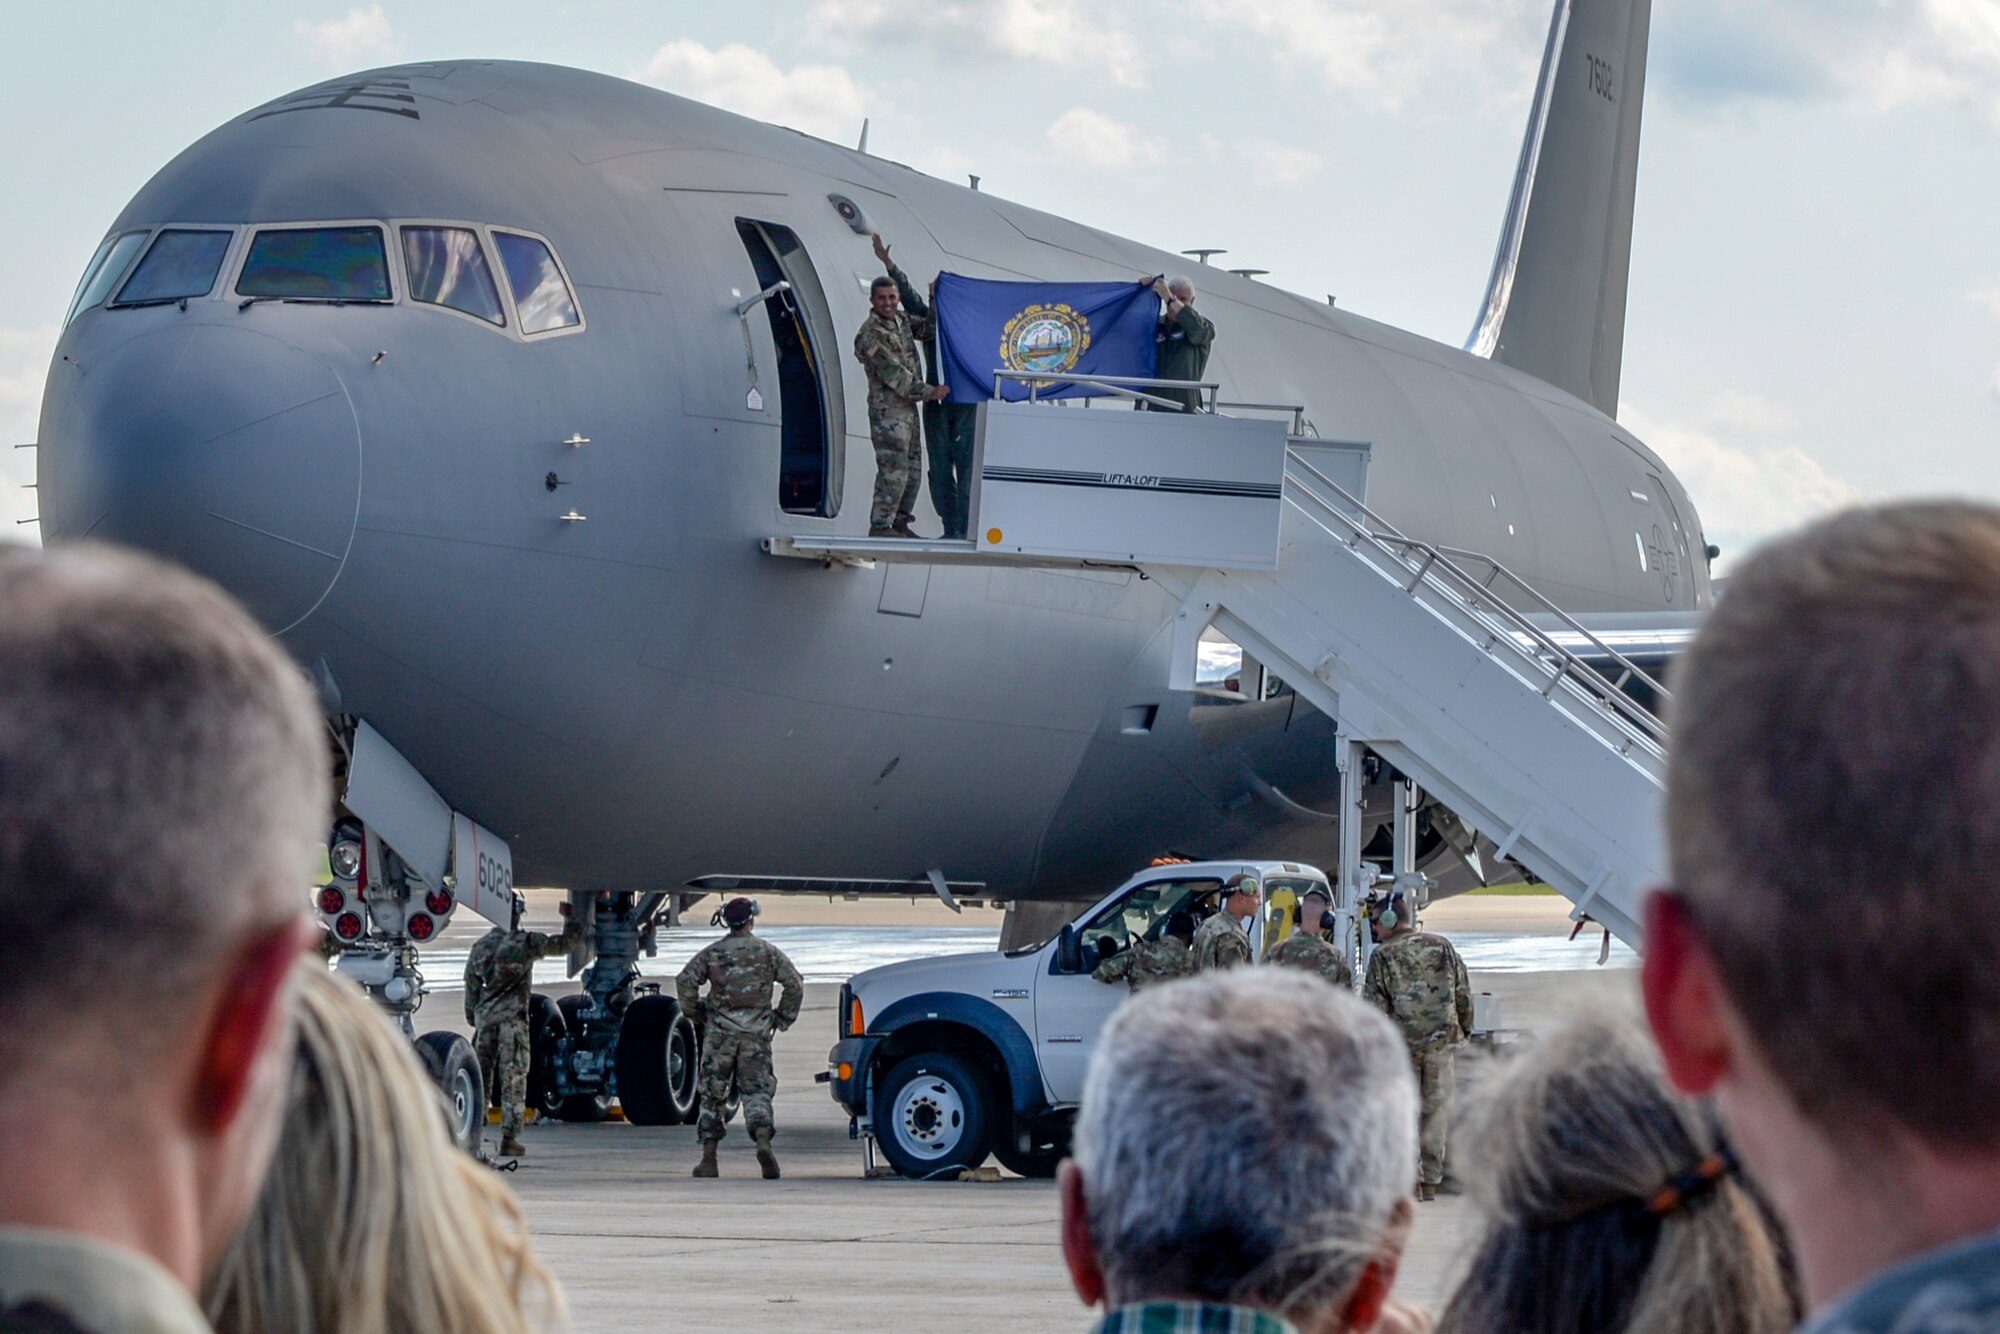 Lt. Gen. L. Scott Rice, Director of the Air National Guard, Maj. Gen. David Mikolaities, Adjutant General of New Hampshire, and Brig. Gen. Laurie Farris, Commander of the New Hampshire Air National Guard, hold up a NH state flag as they exit the first delivered KC-46 Pegasus to Pease Air National Guard Base, NH, Aug. 8, 2019. The Pegasus forges a new era at Pease marking the first upgrade to its aircraft inventory in decades.(U.S. Air National Guard photo by Senior Airman Taylor Queen)